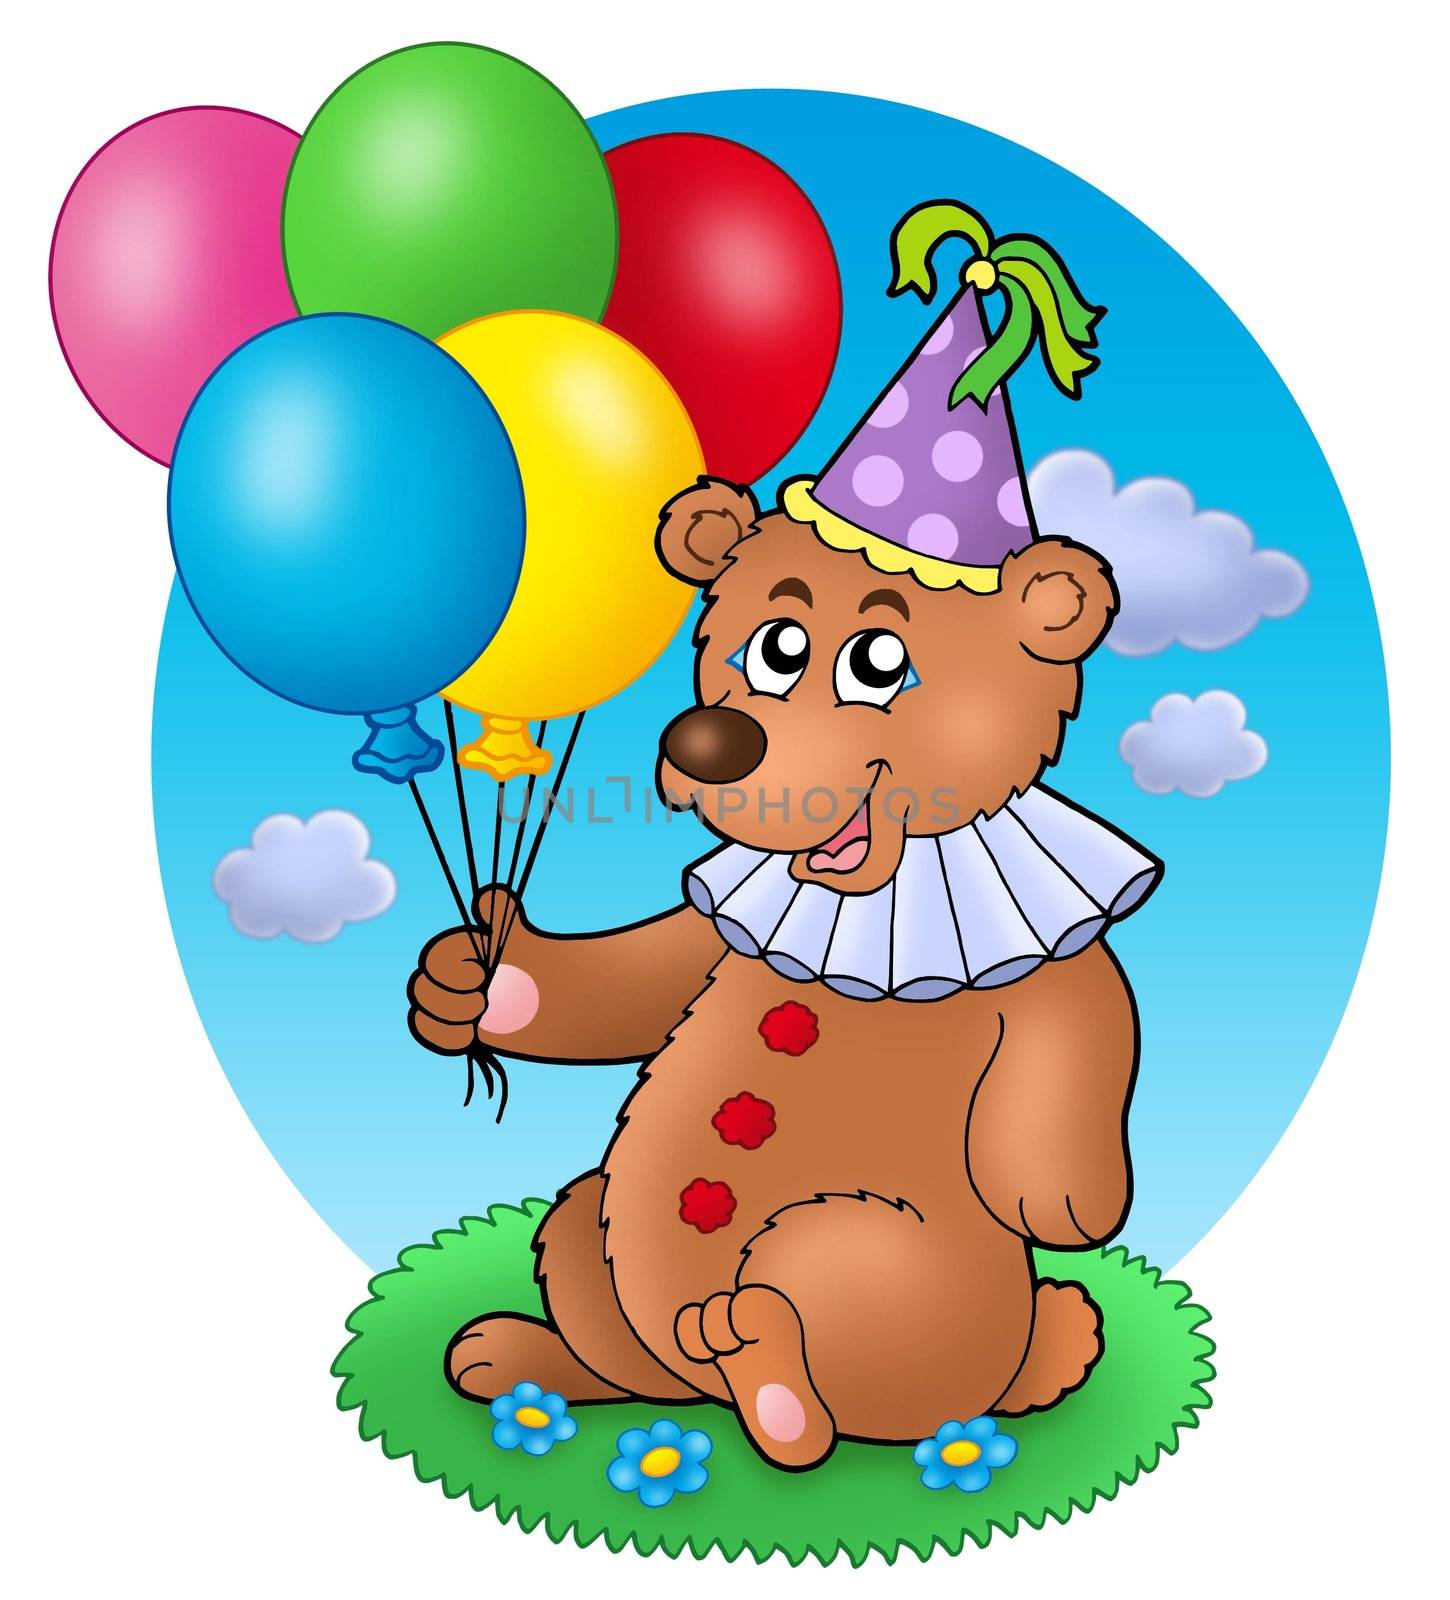 Bear clown with balloons on meadow by clairev